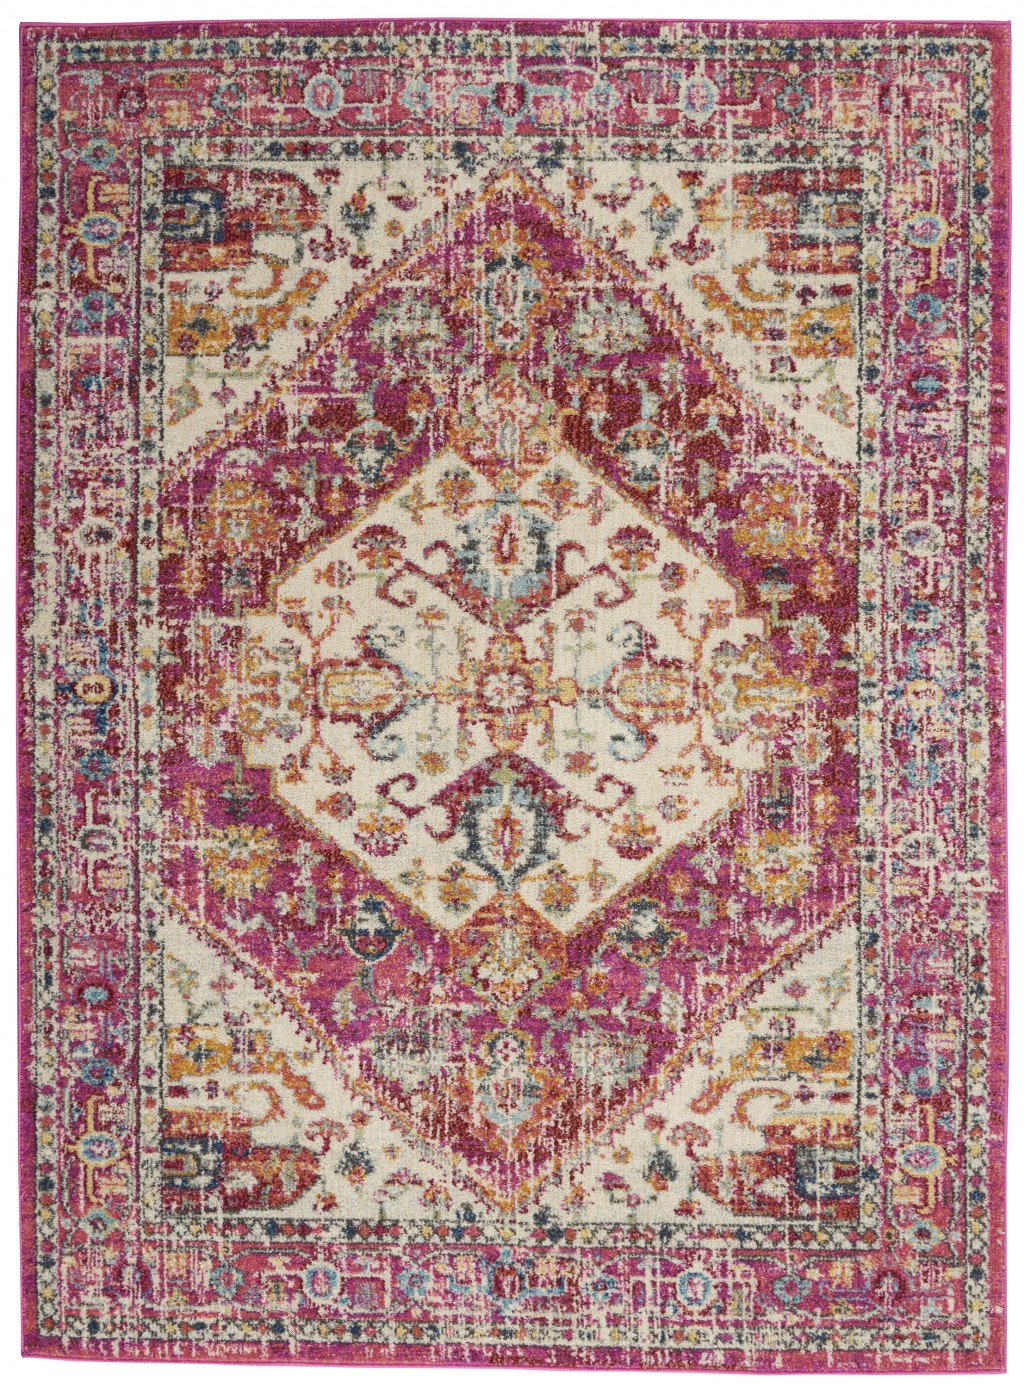 4' X 6' Pink And Ivory Power Loom Area Rug-385555-1